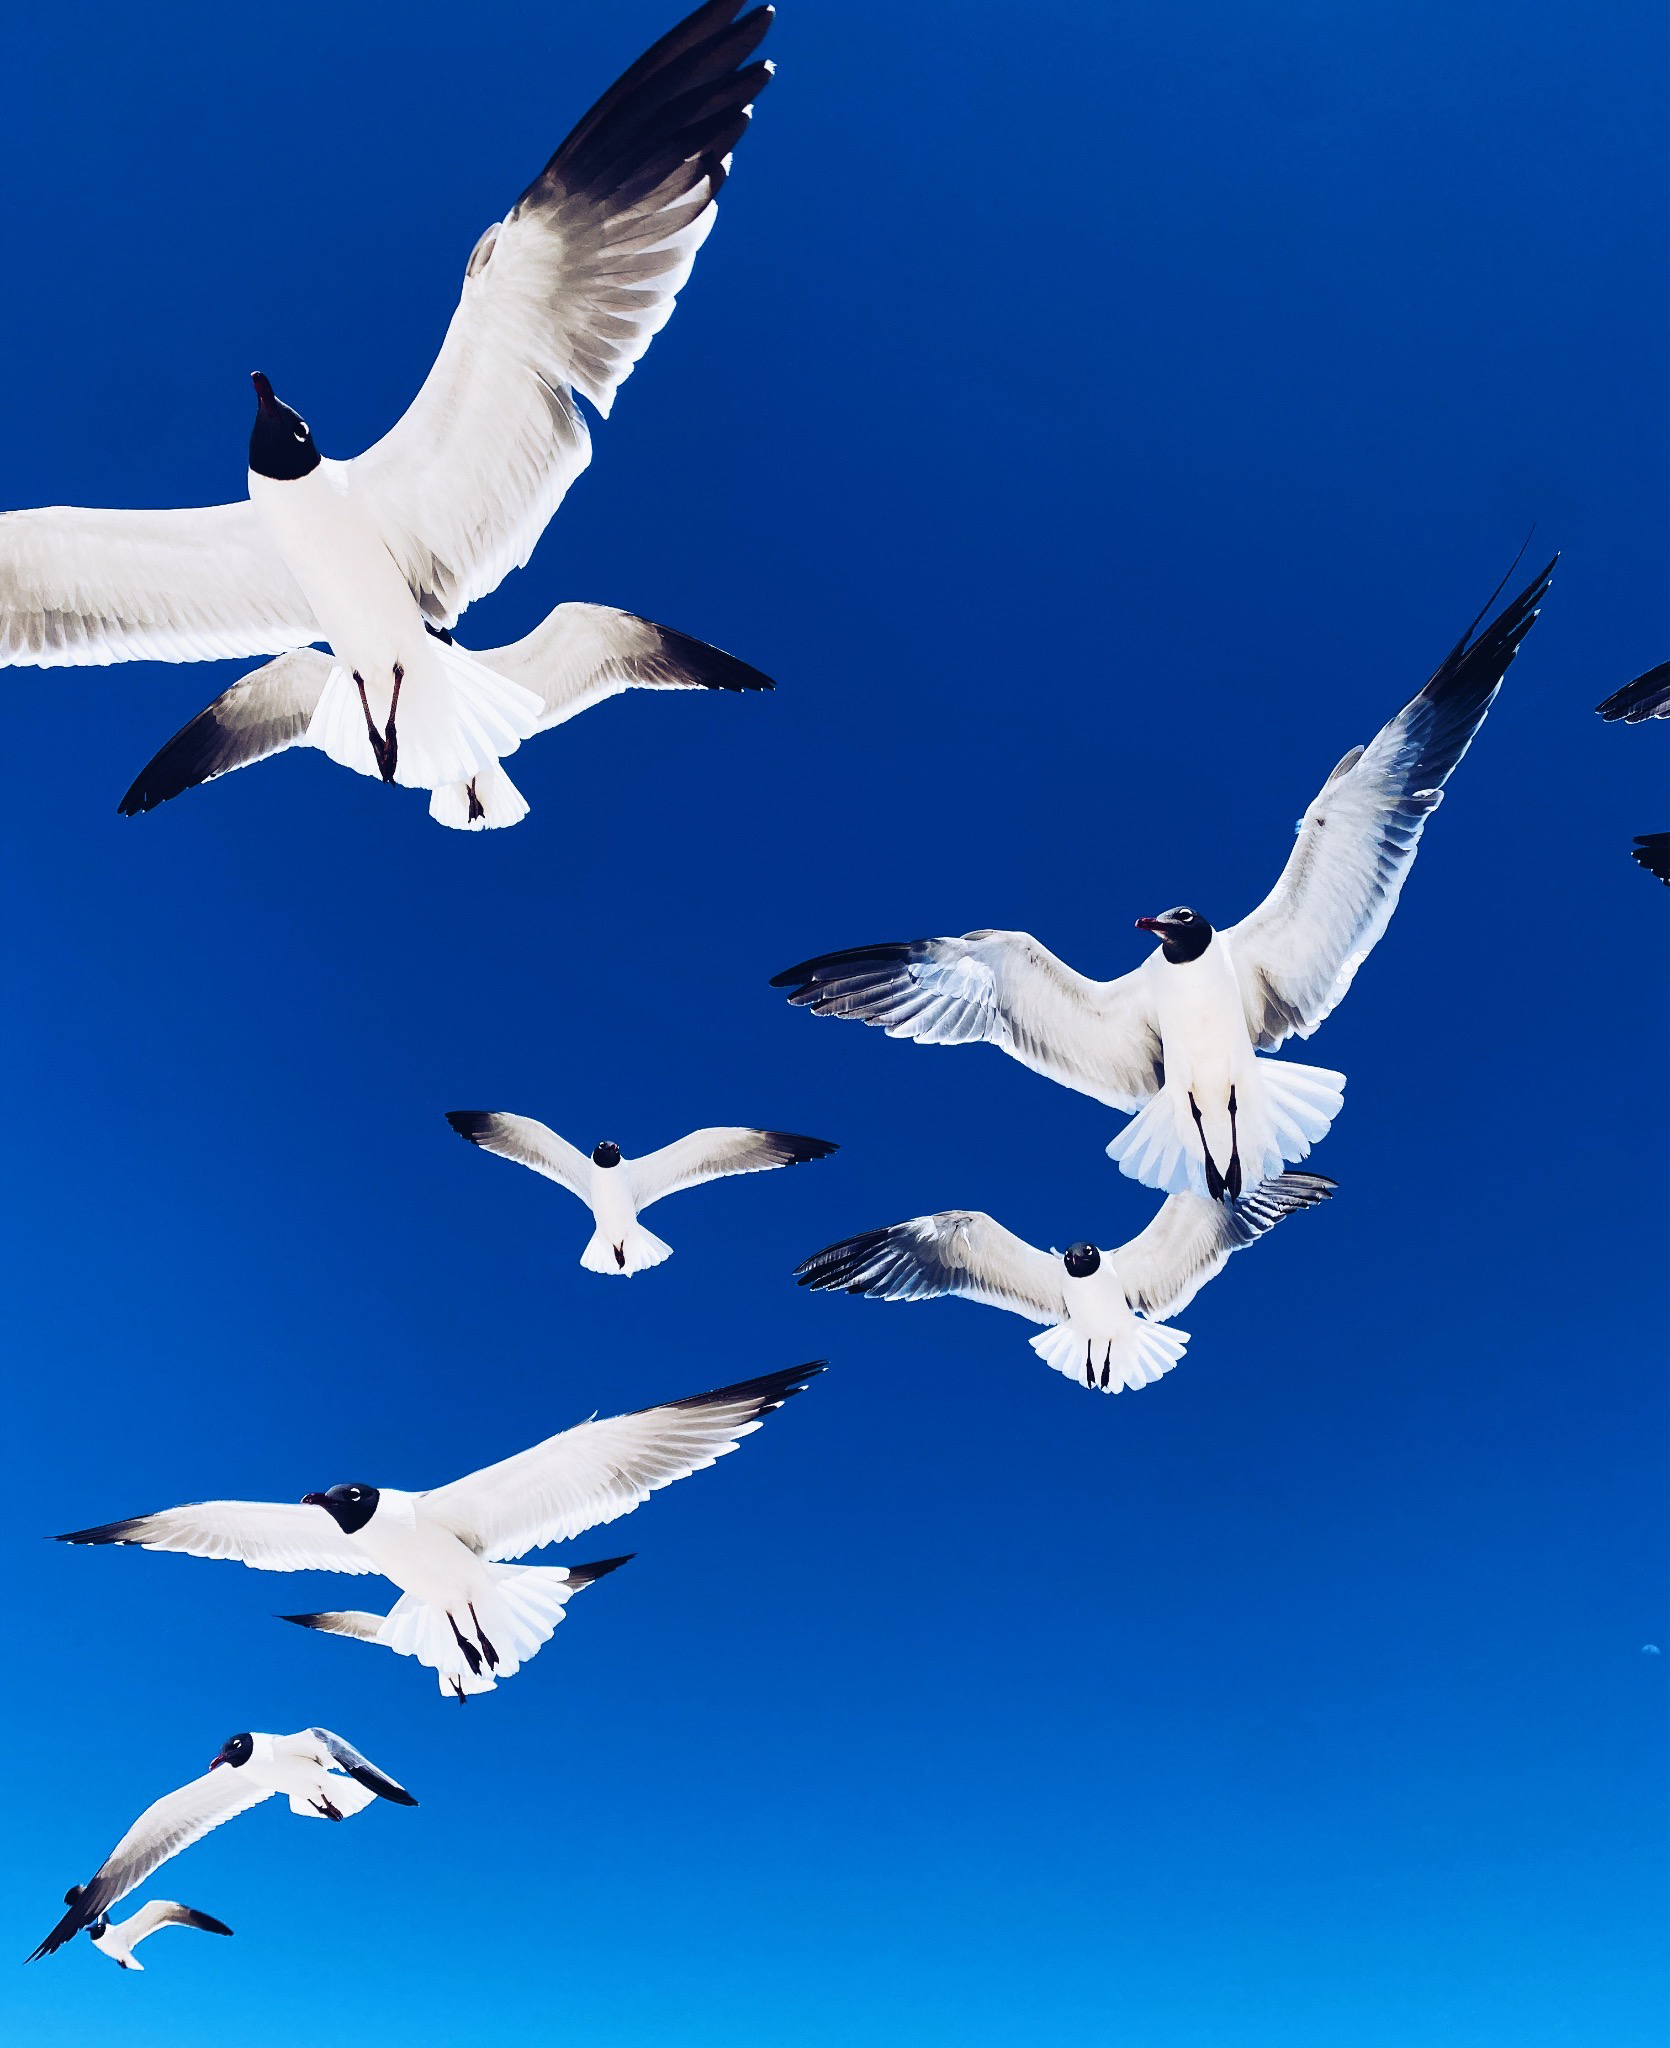 A photograph of seagulls in flight. The camera is positioned directly below the six birds, capturing the slanted sideways V they make in the deep azure sky. The stark whiteness of their feathers contrasts jarringly against the background.